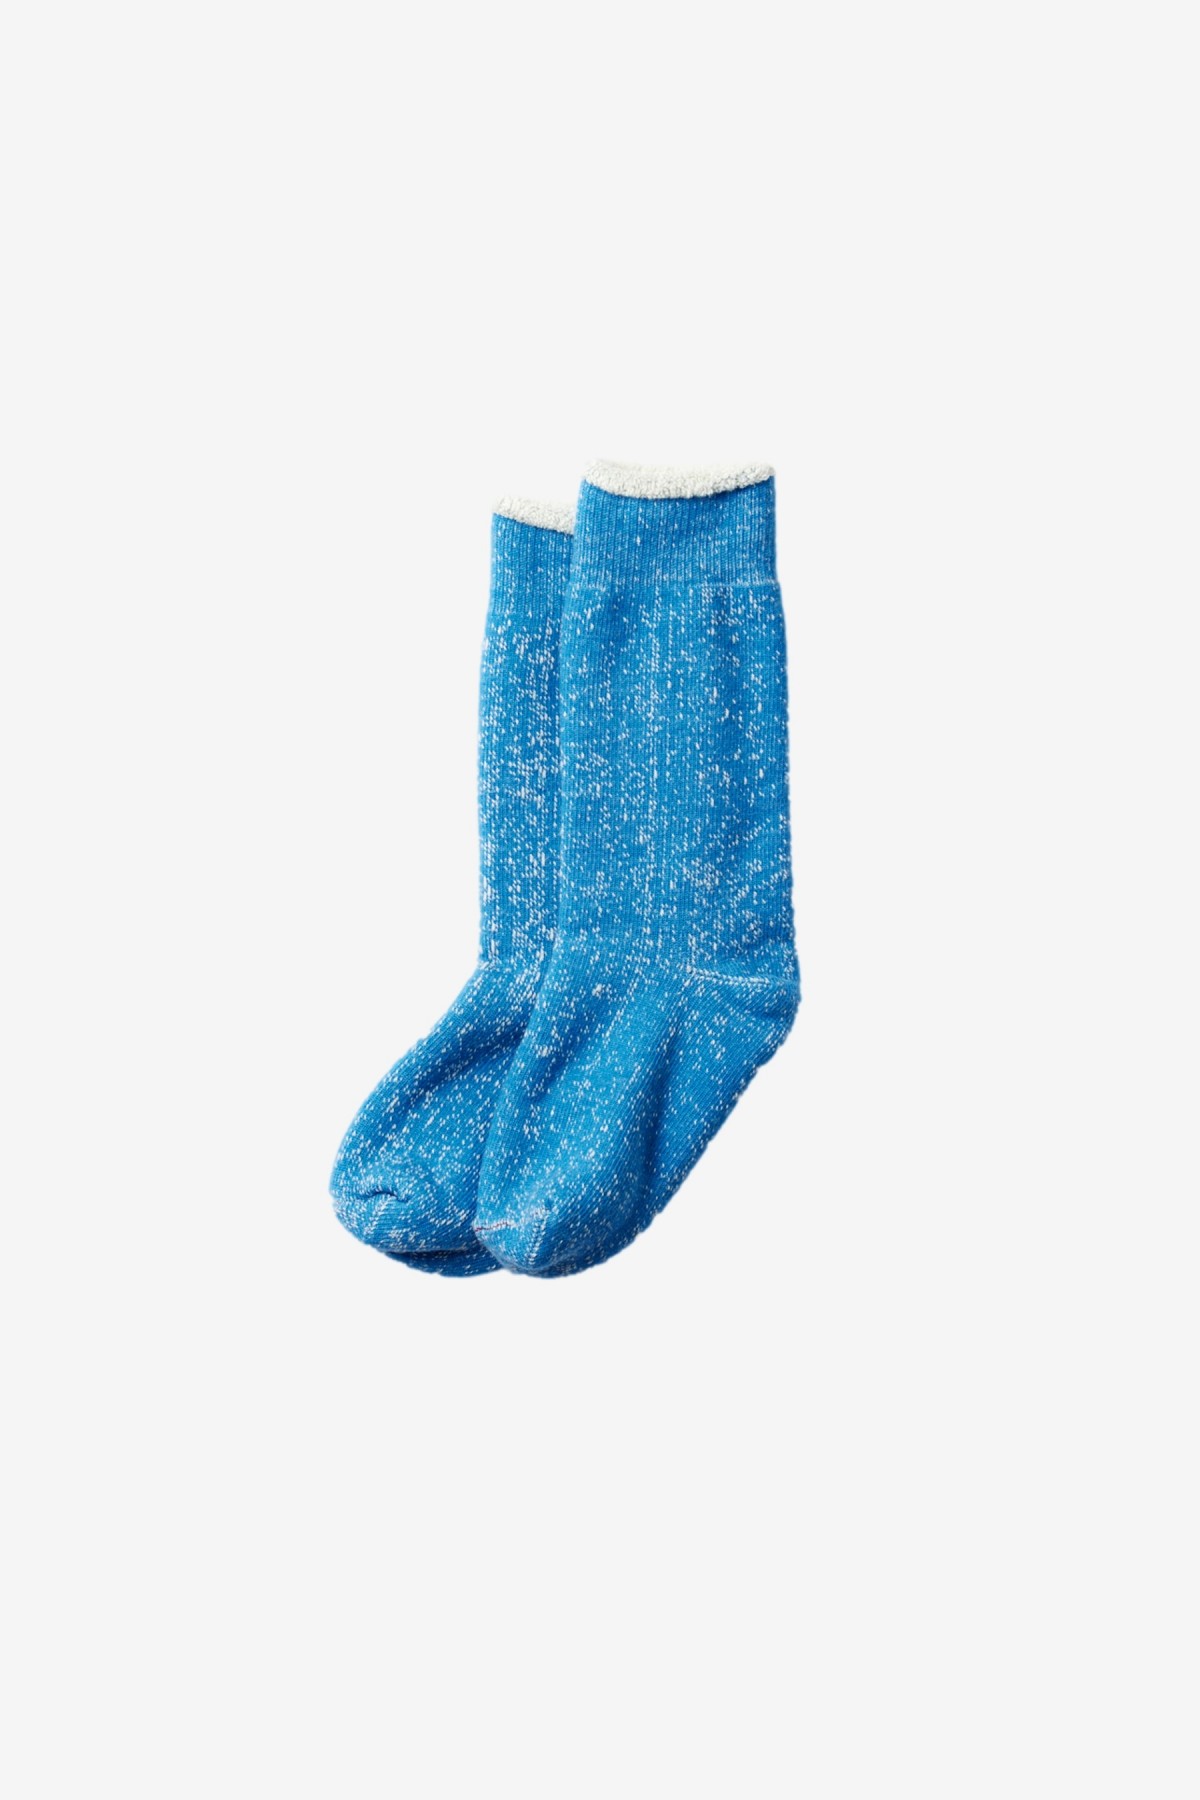 RoToTo Double Face Socks in Blue